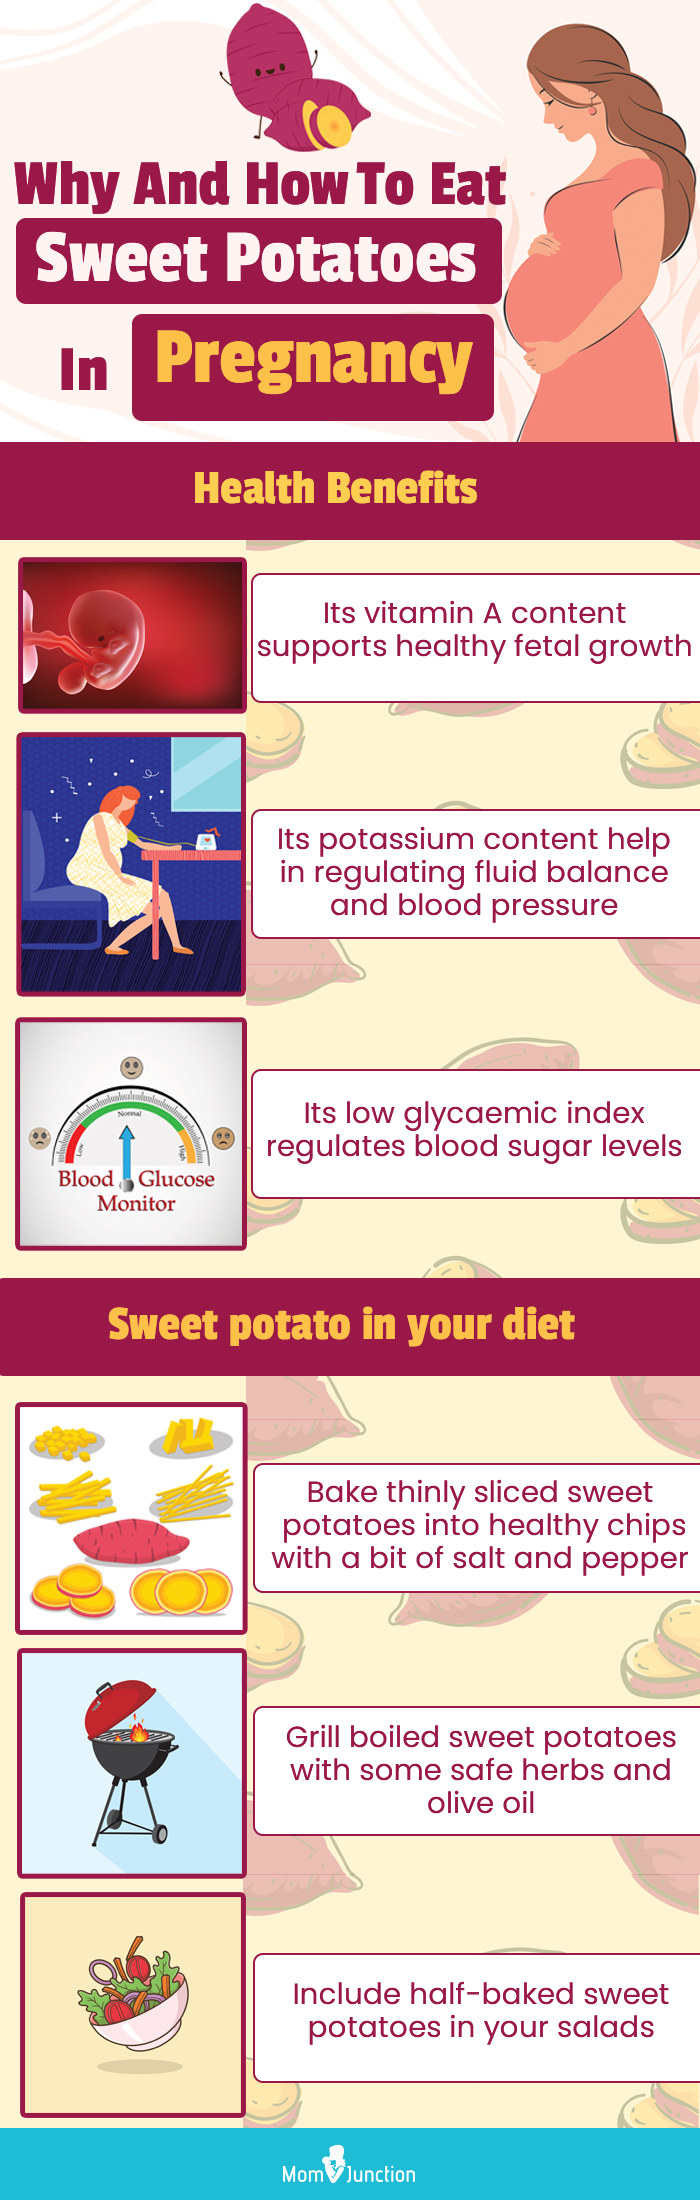 why and how to eat sweet potatoes in pregnancy (infographic)